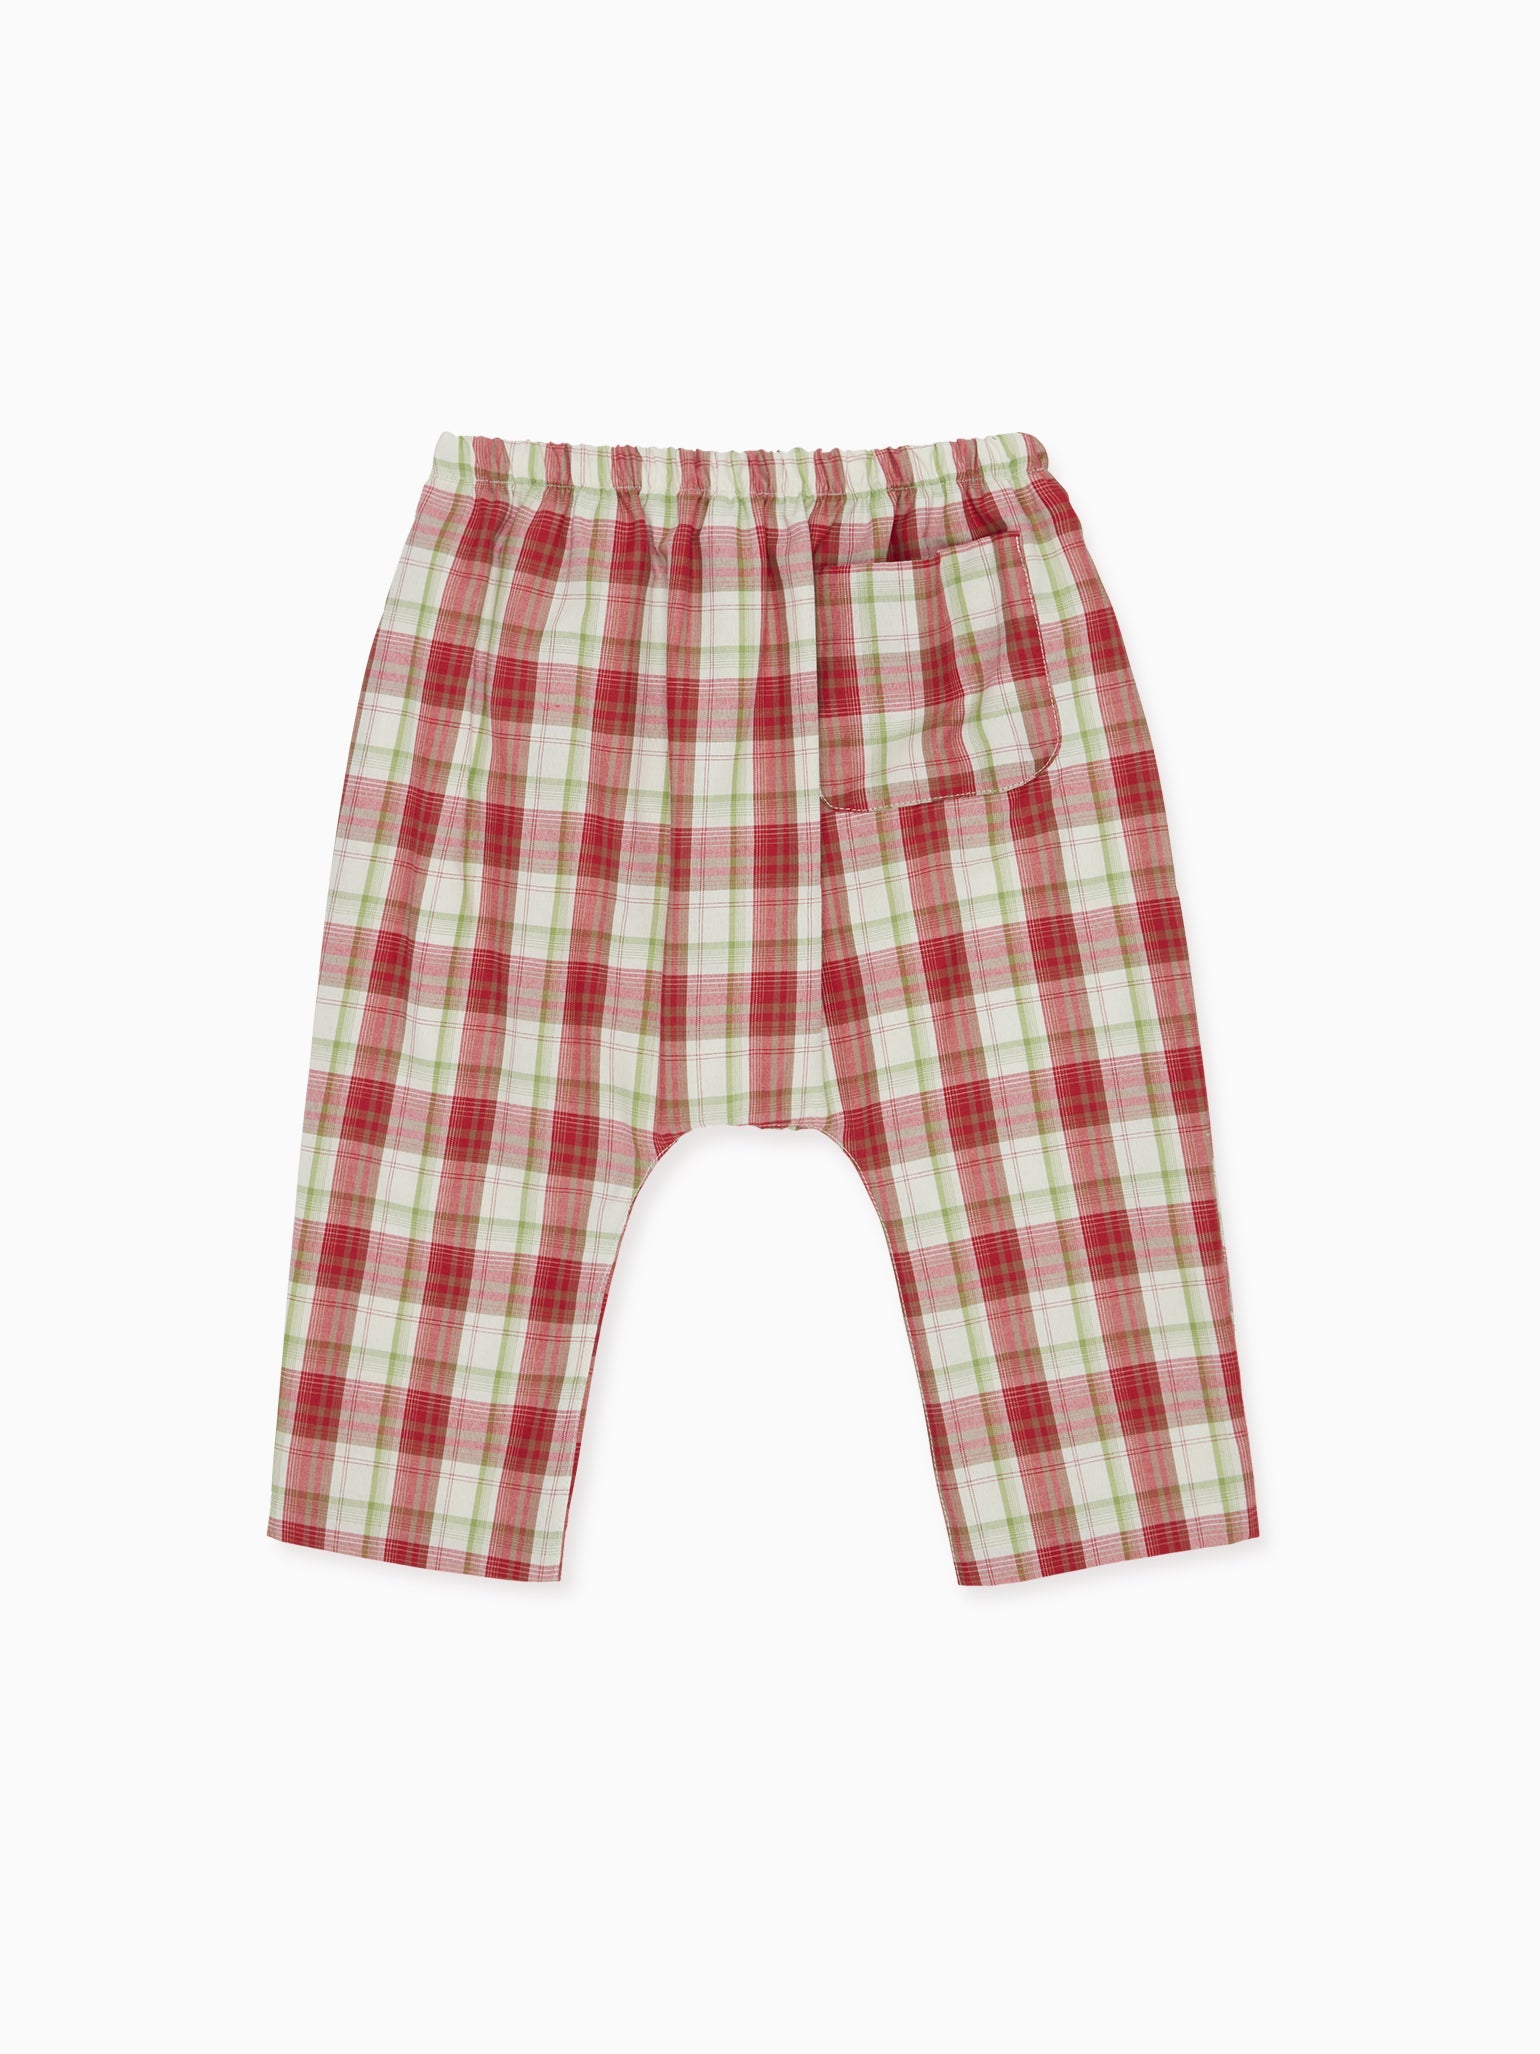 Red Check Alex Baby Trousers